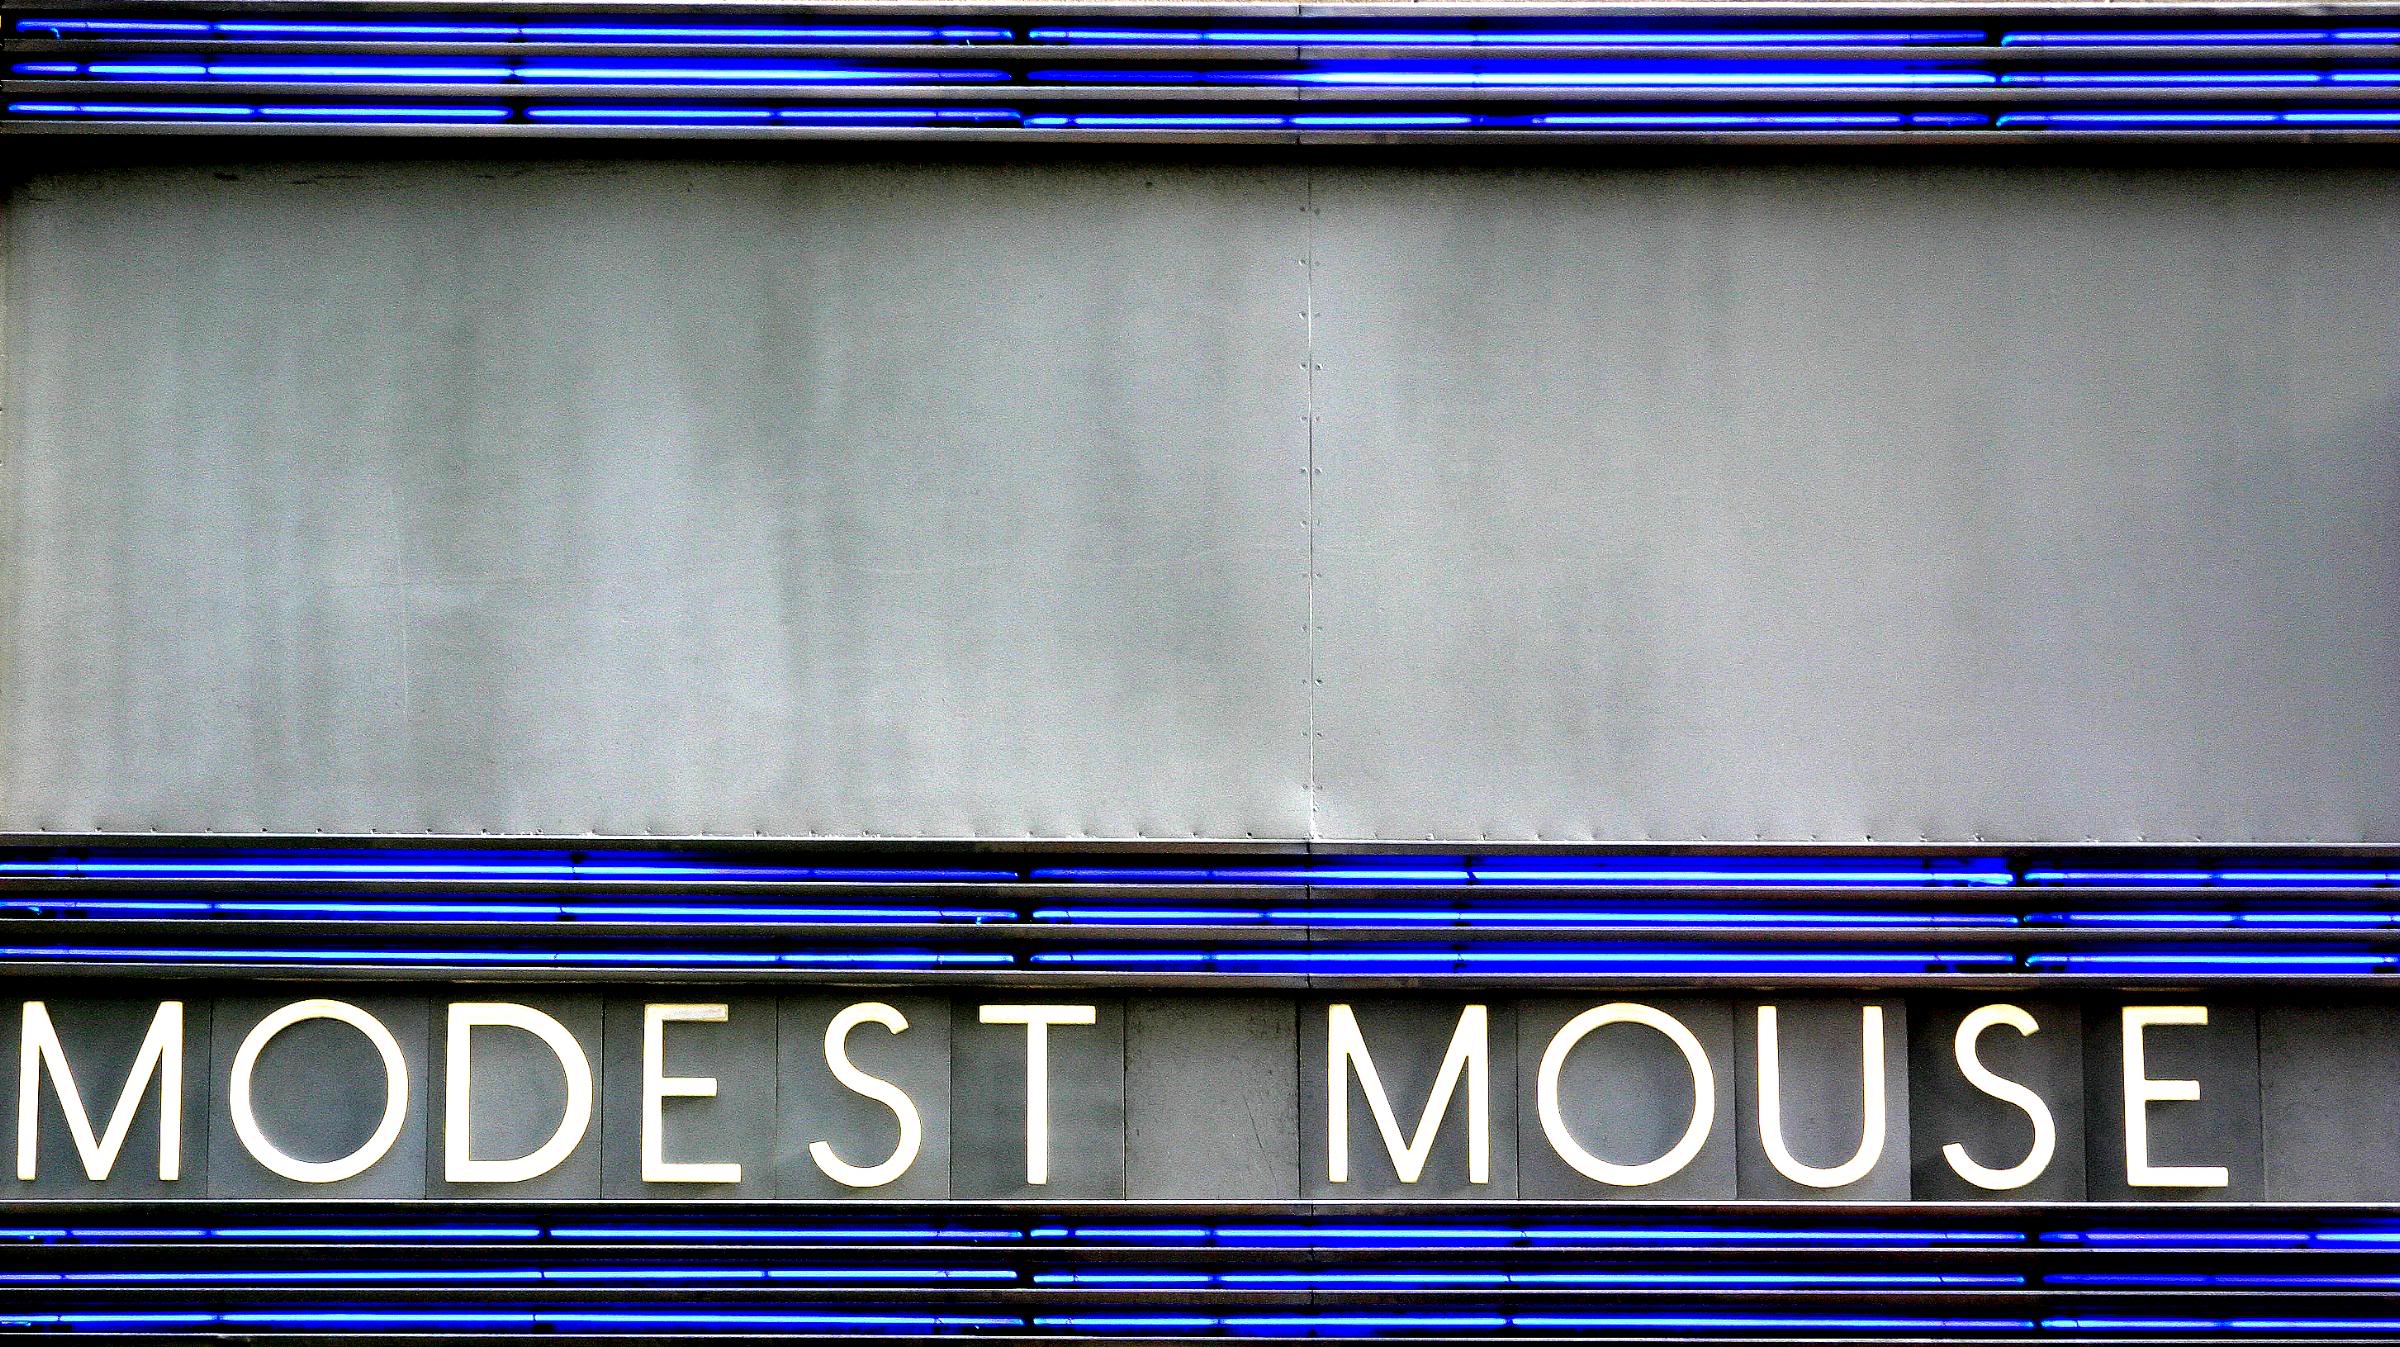 Music Band Modest Mouse Indie Rock 2400x1347